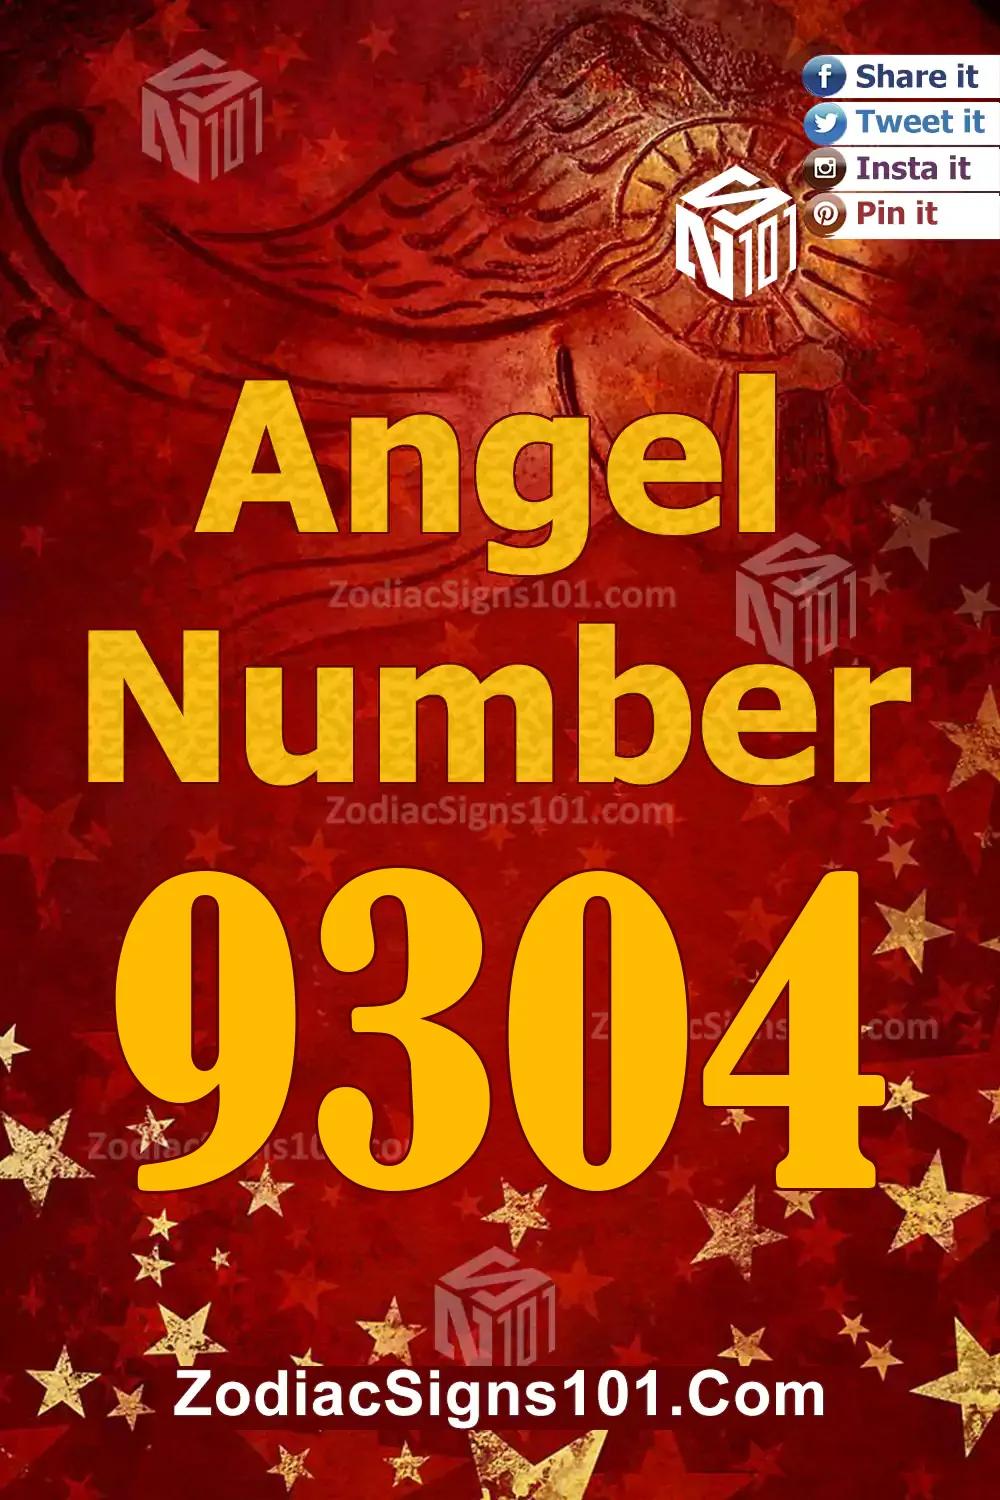 9304 Angel Number Meaning